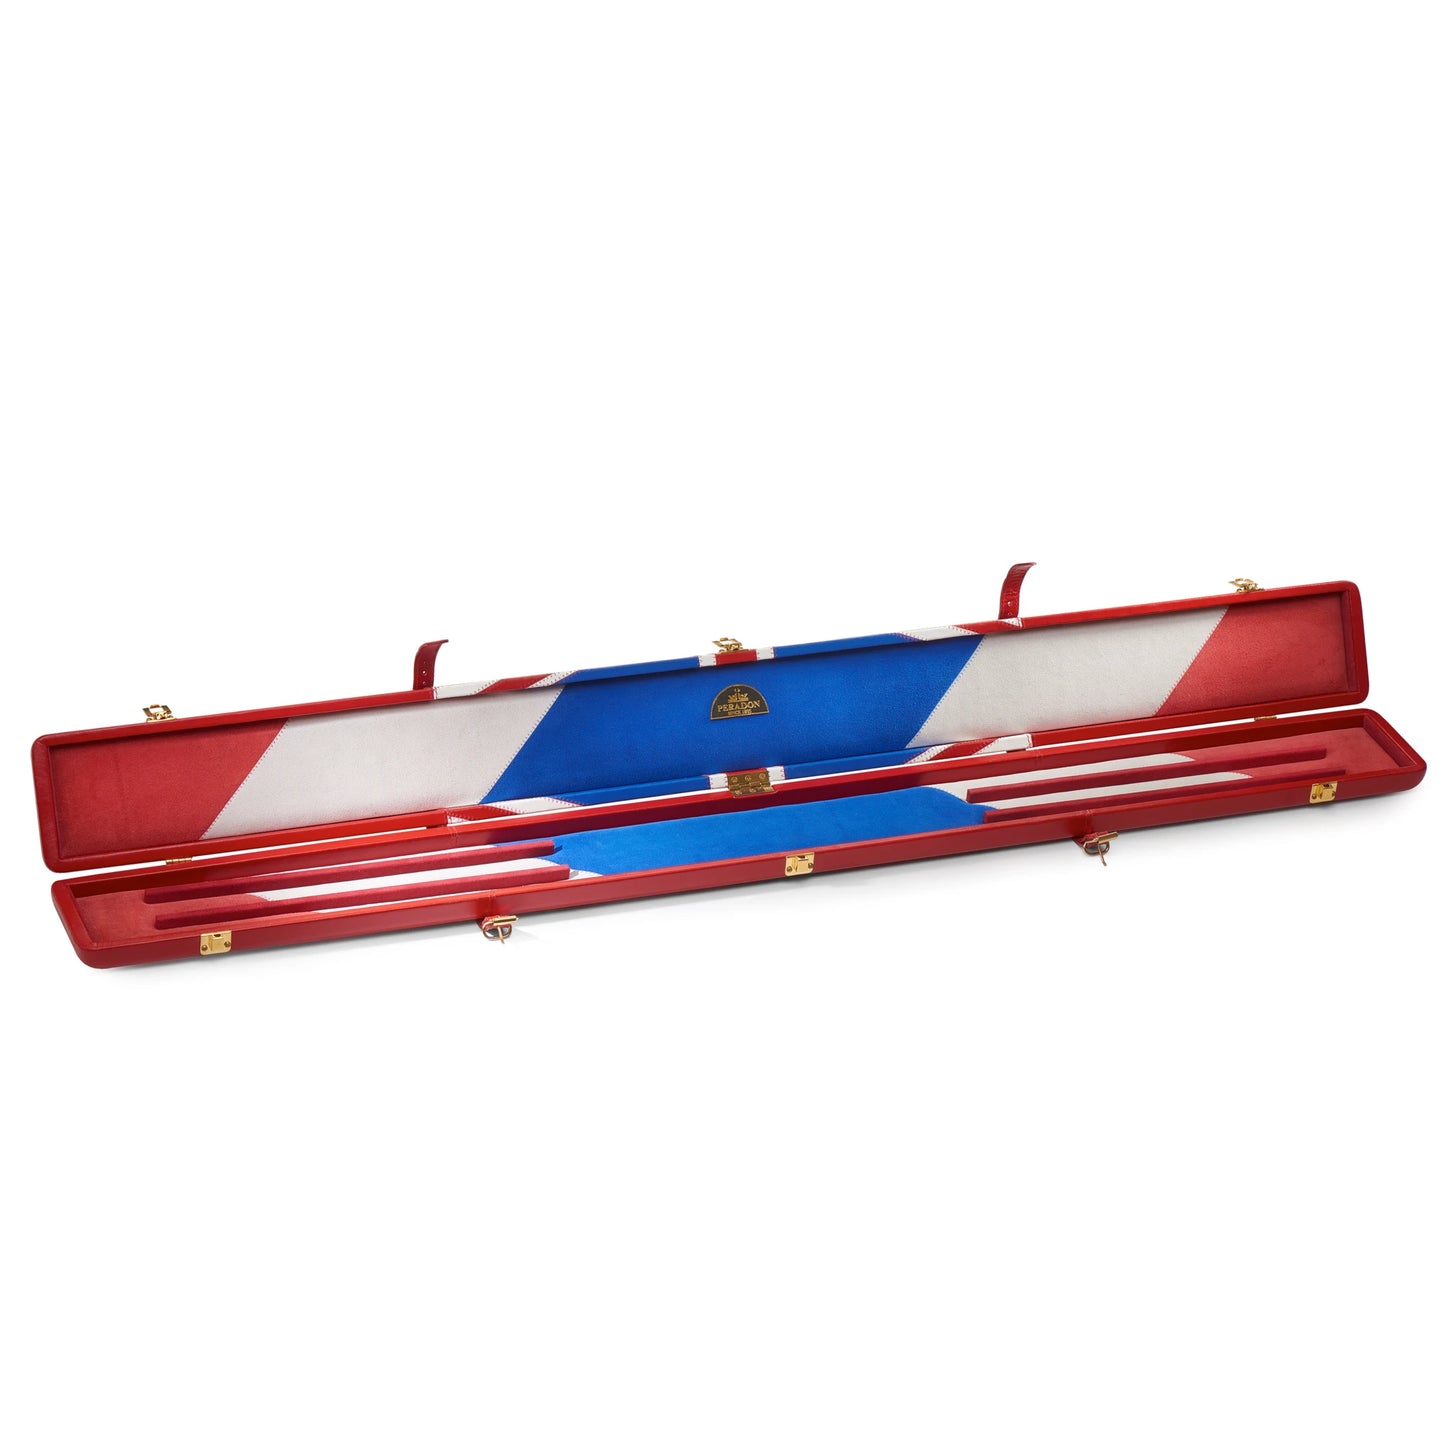 Peradon Leather Union Jack Design Snooker Cue Case for 3/4 Jointed Cues